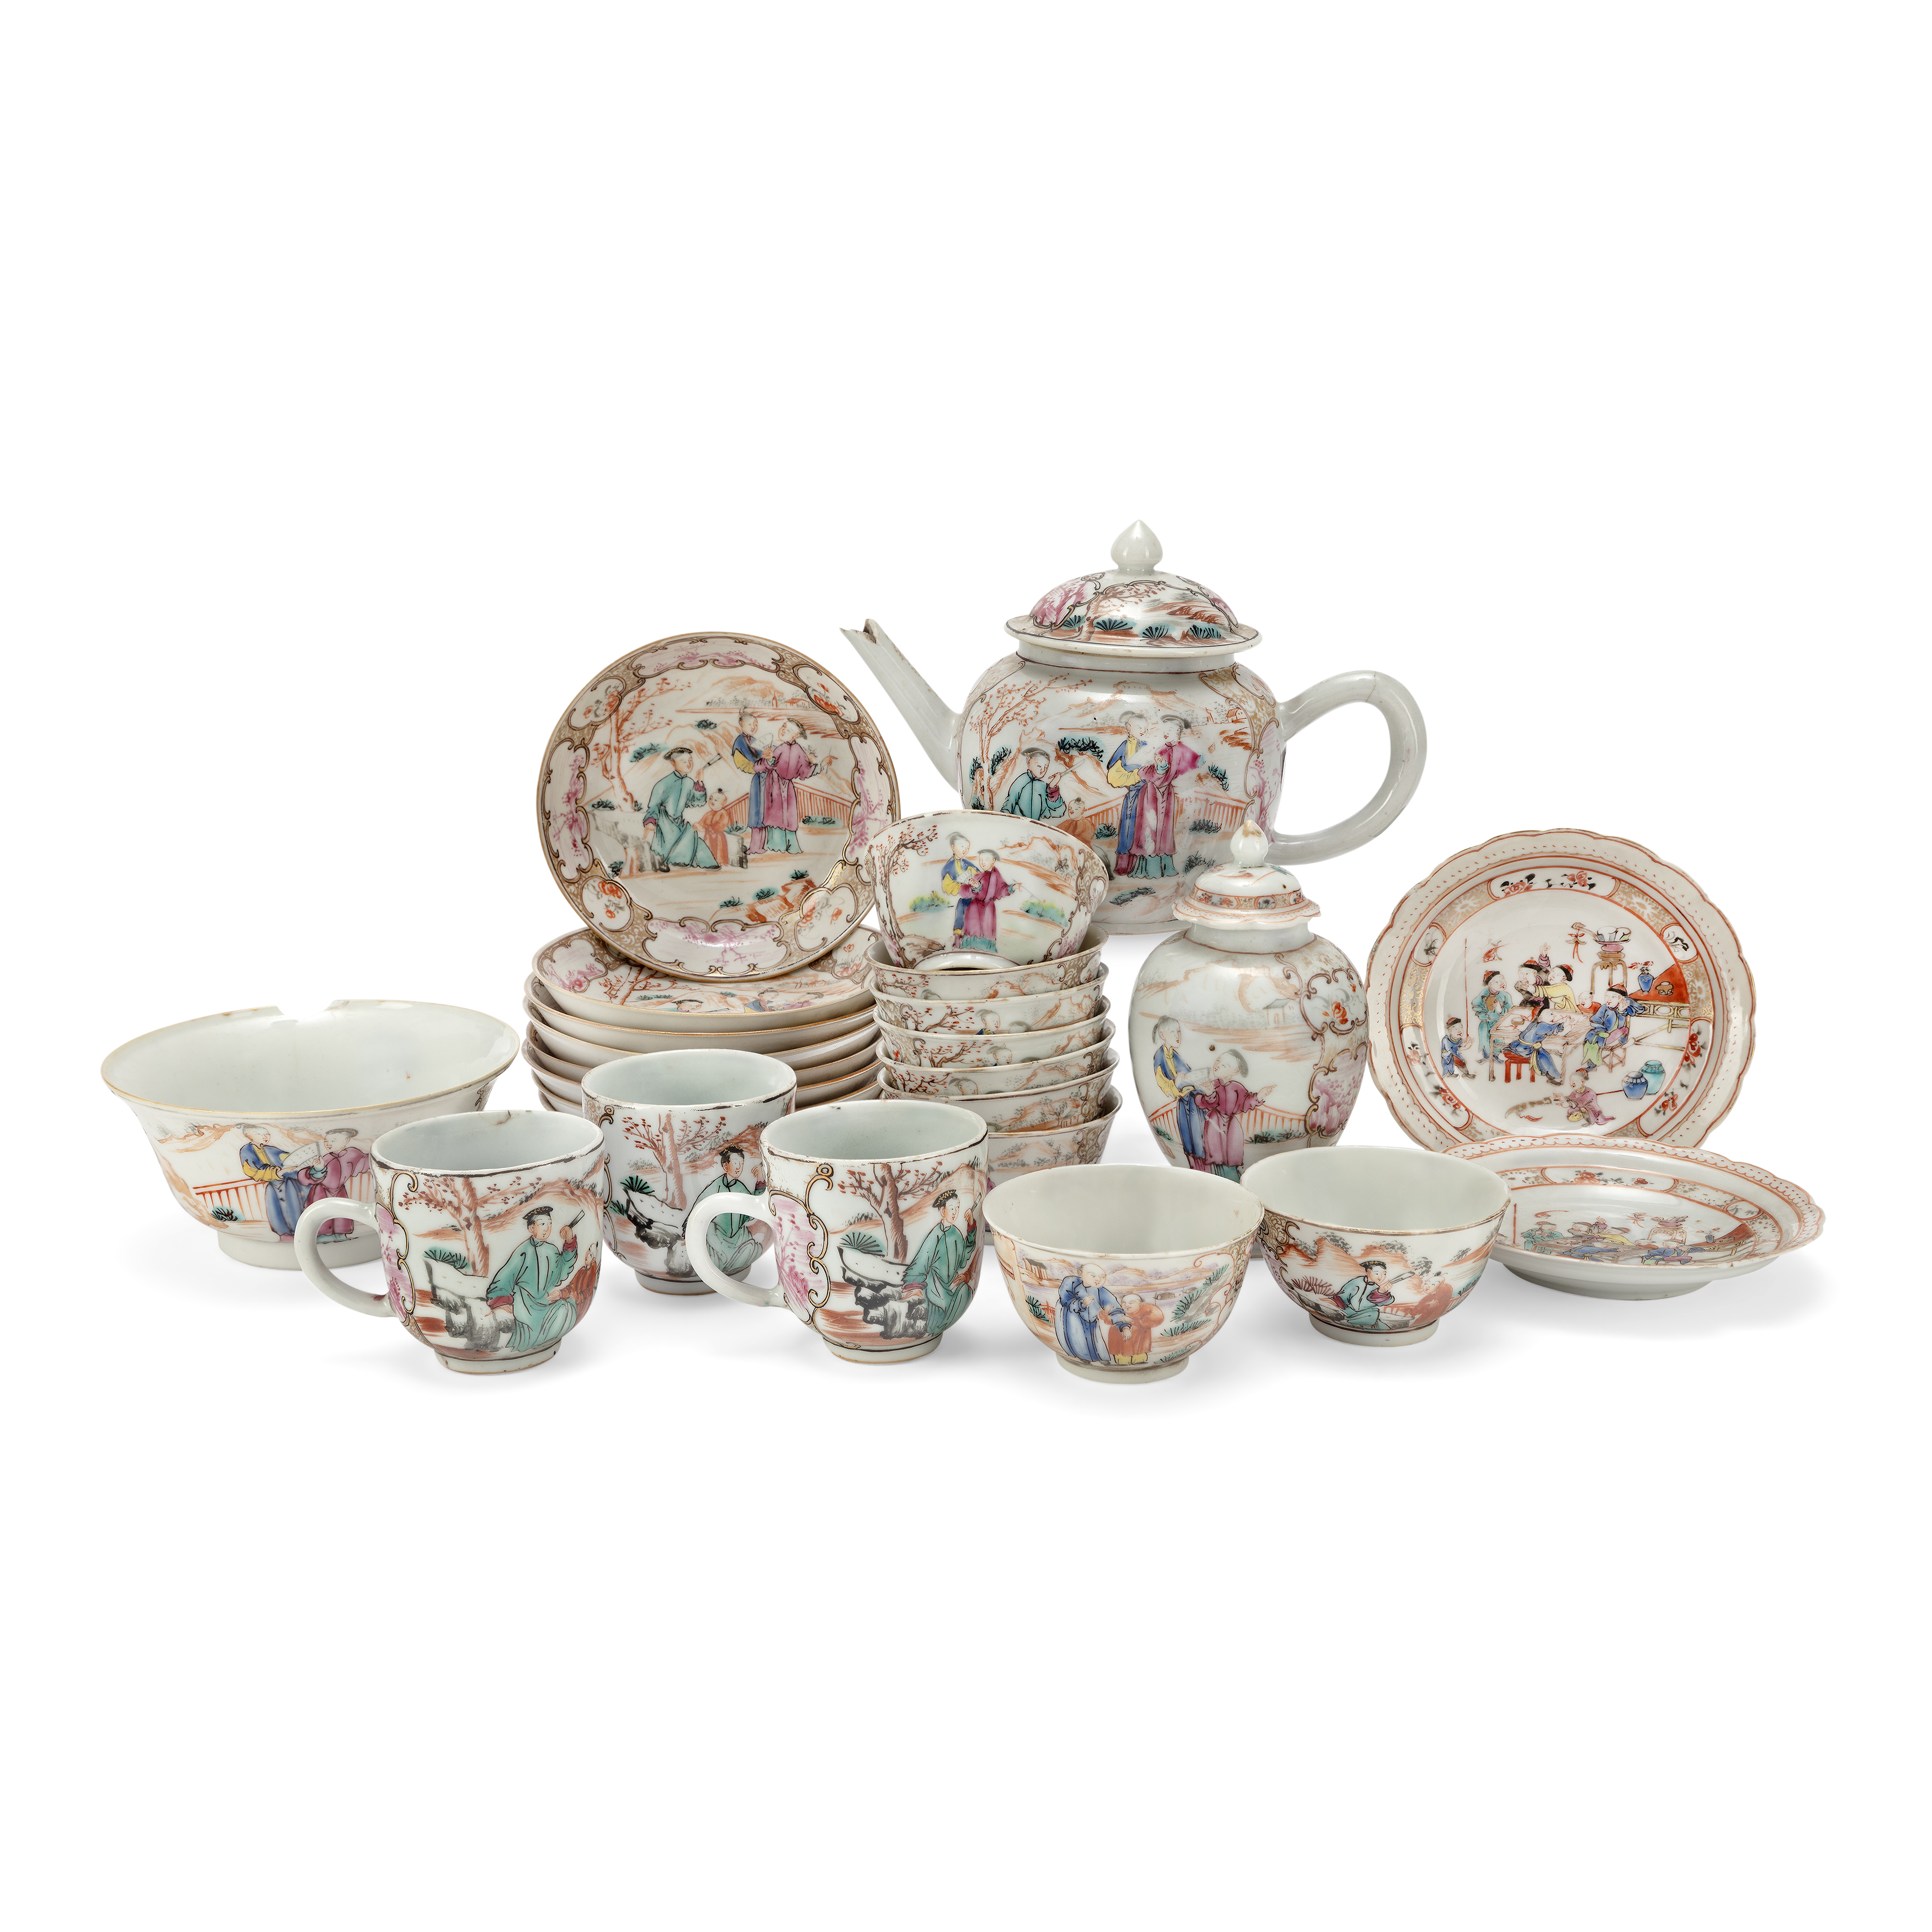 A Chinese export famille rose matched tea/coffee set Qing dynasty, 18th century Comprising teap...